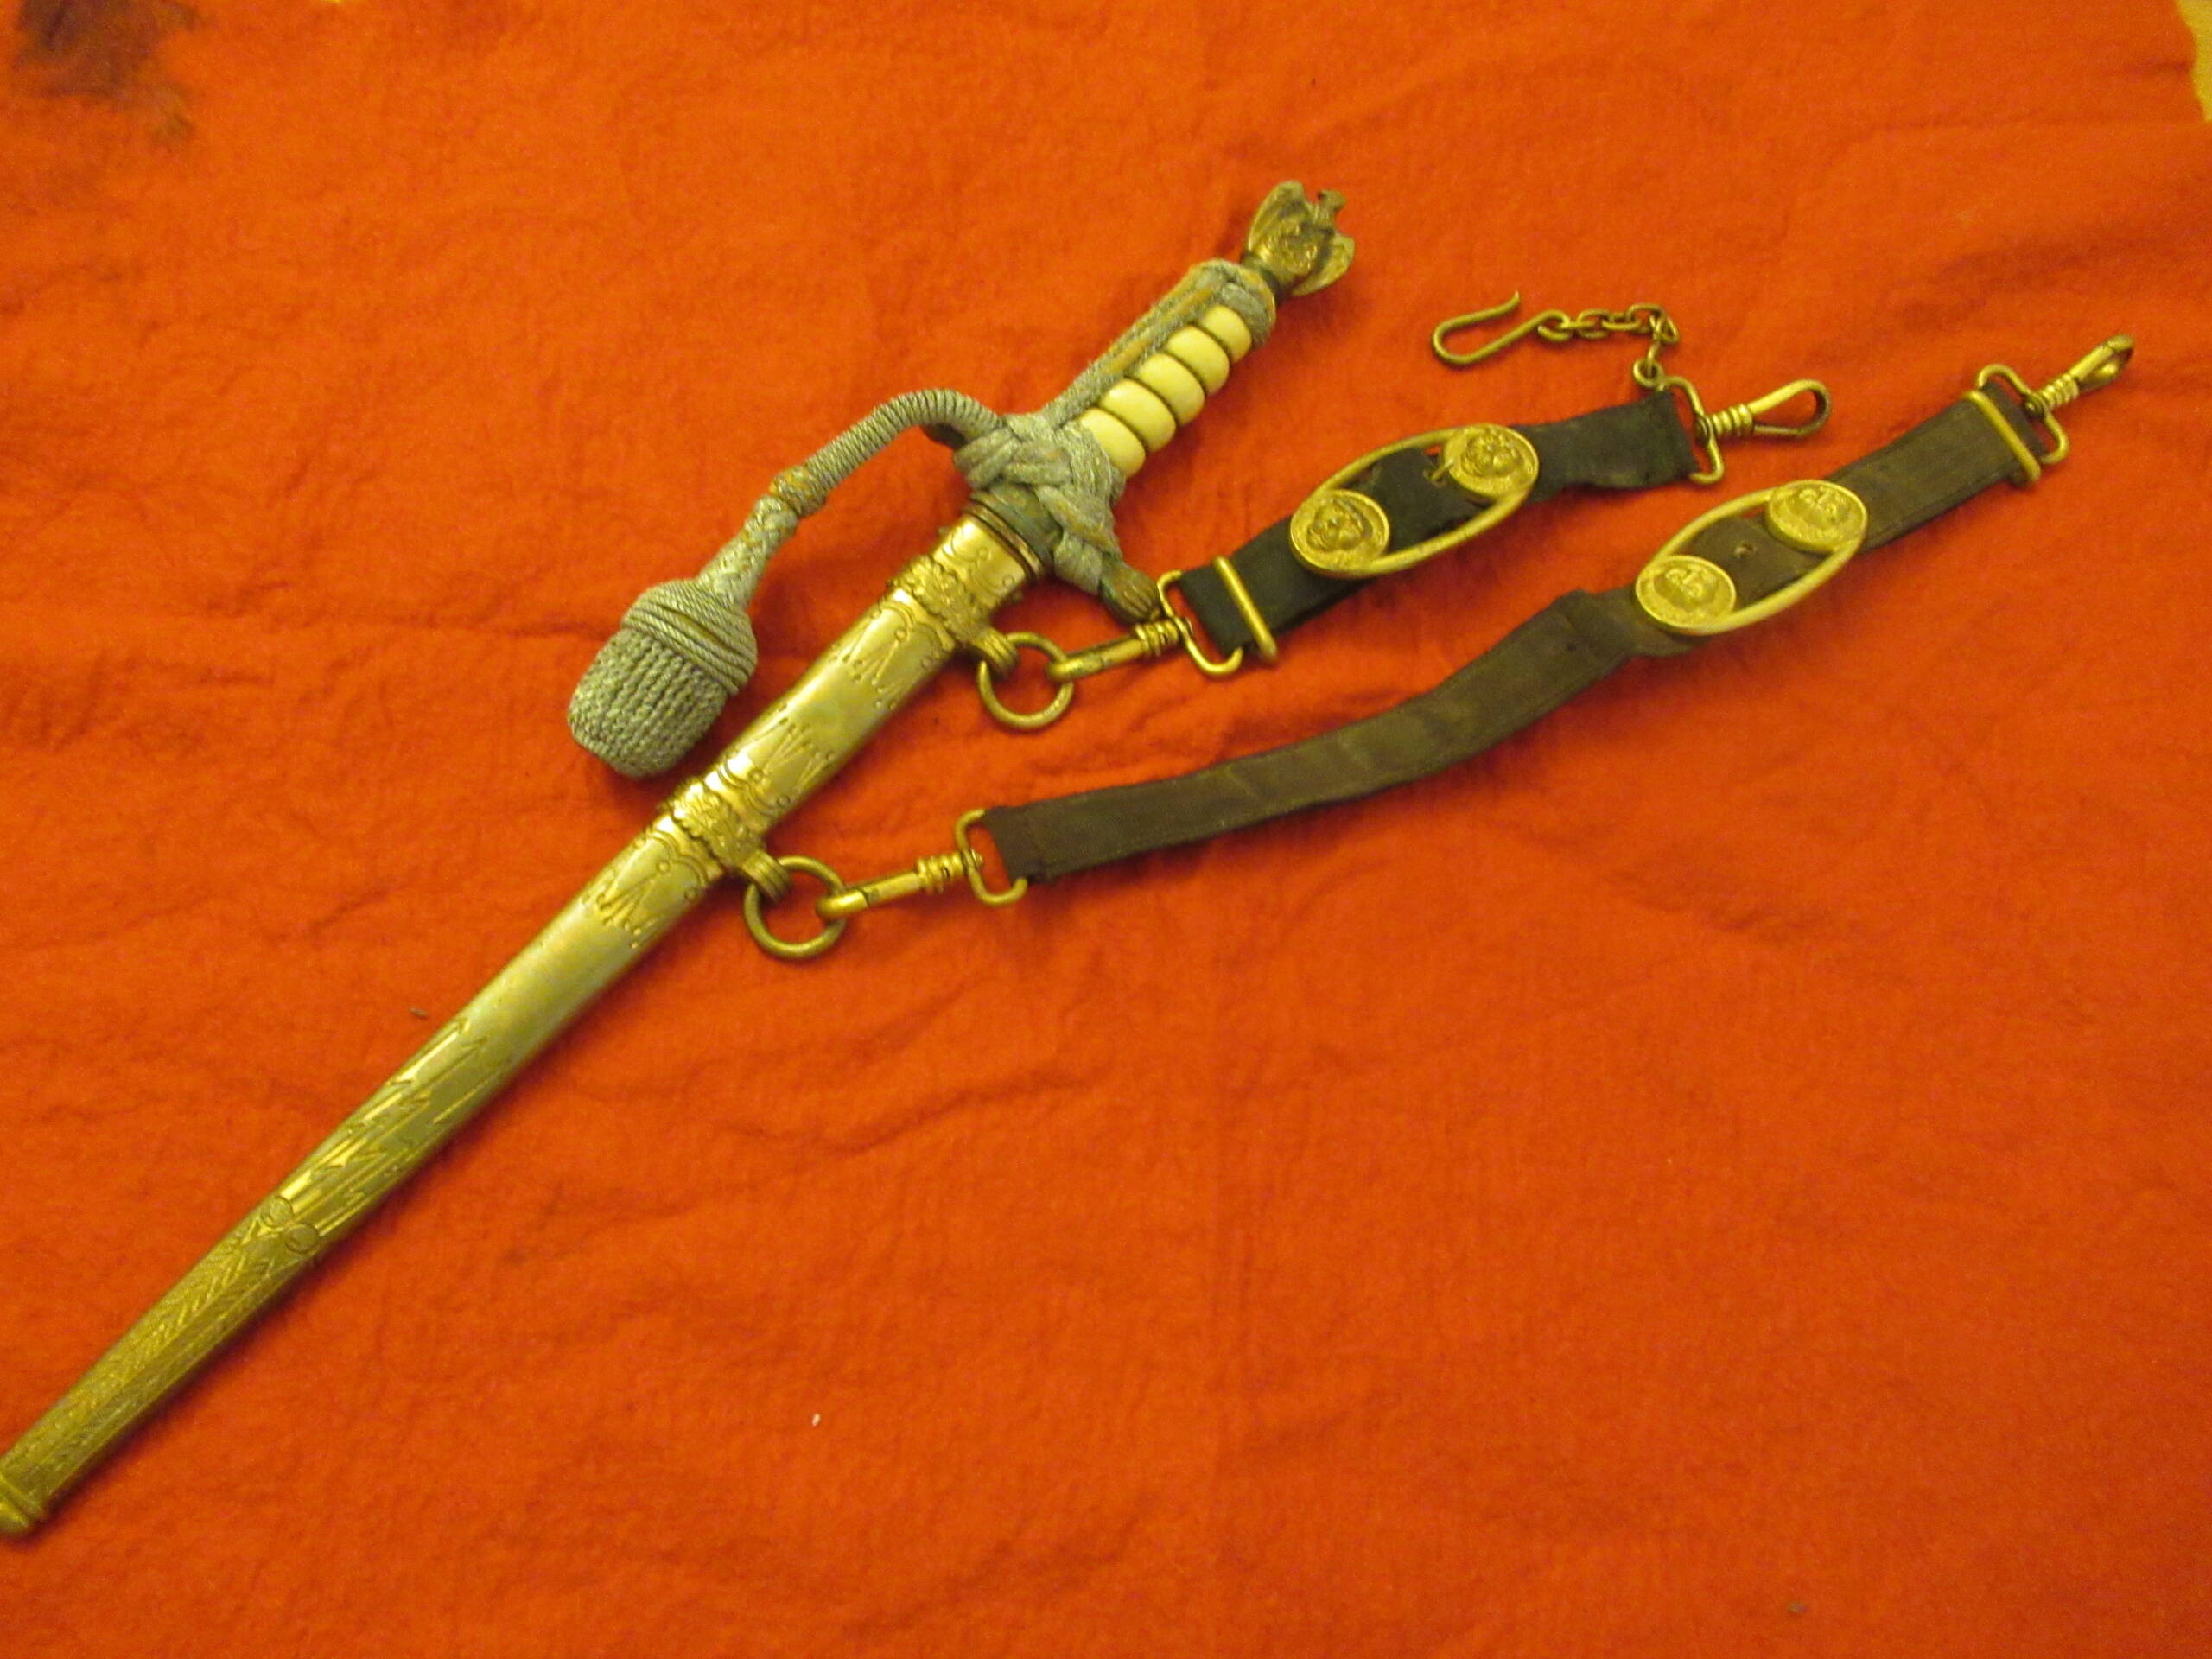 KM dagger Eickhorn with all accessories, gilted blade